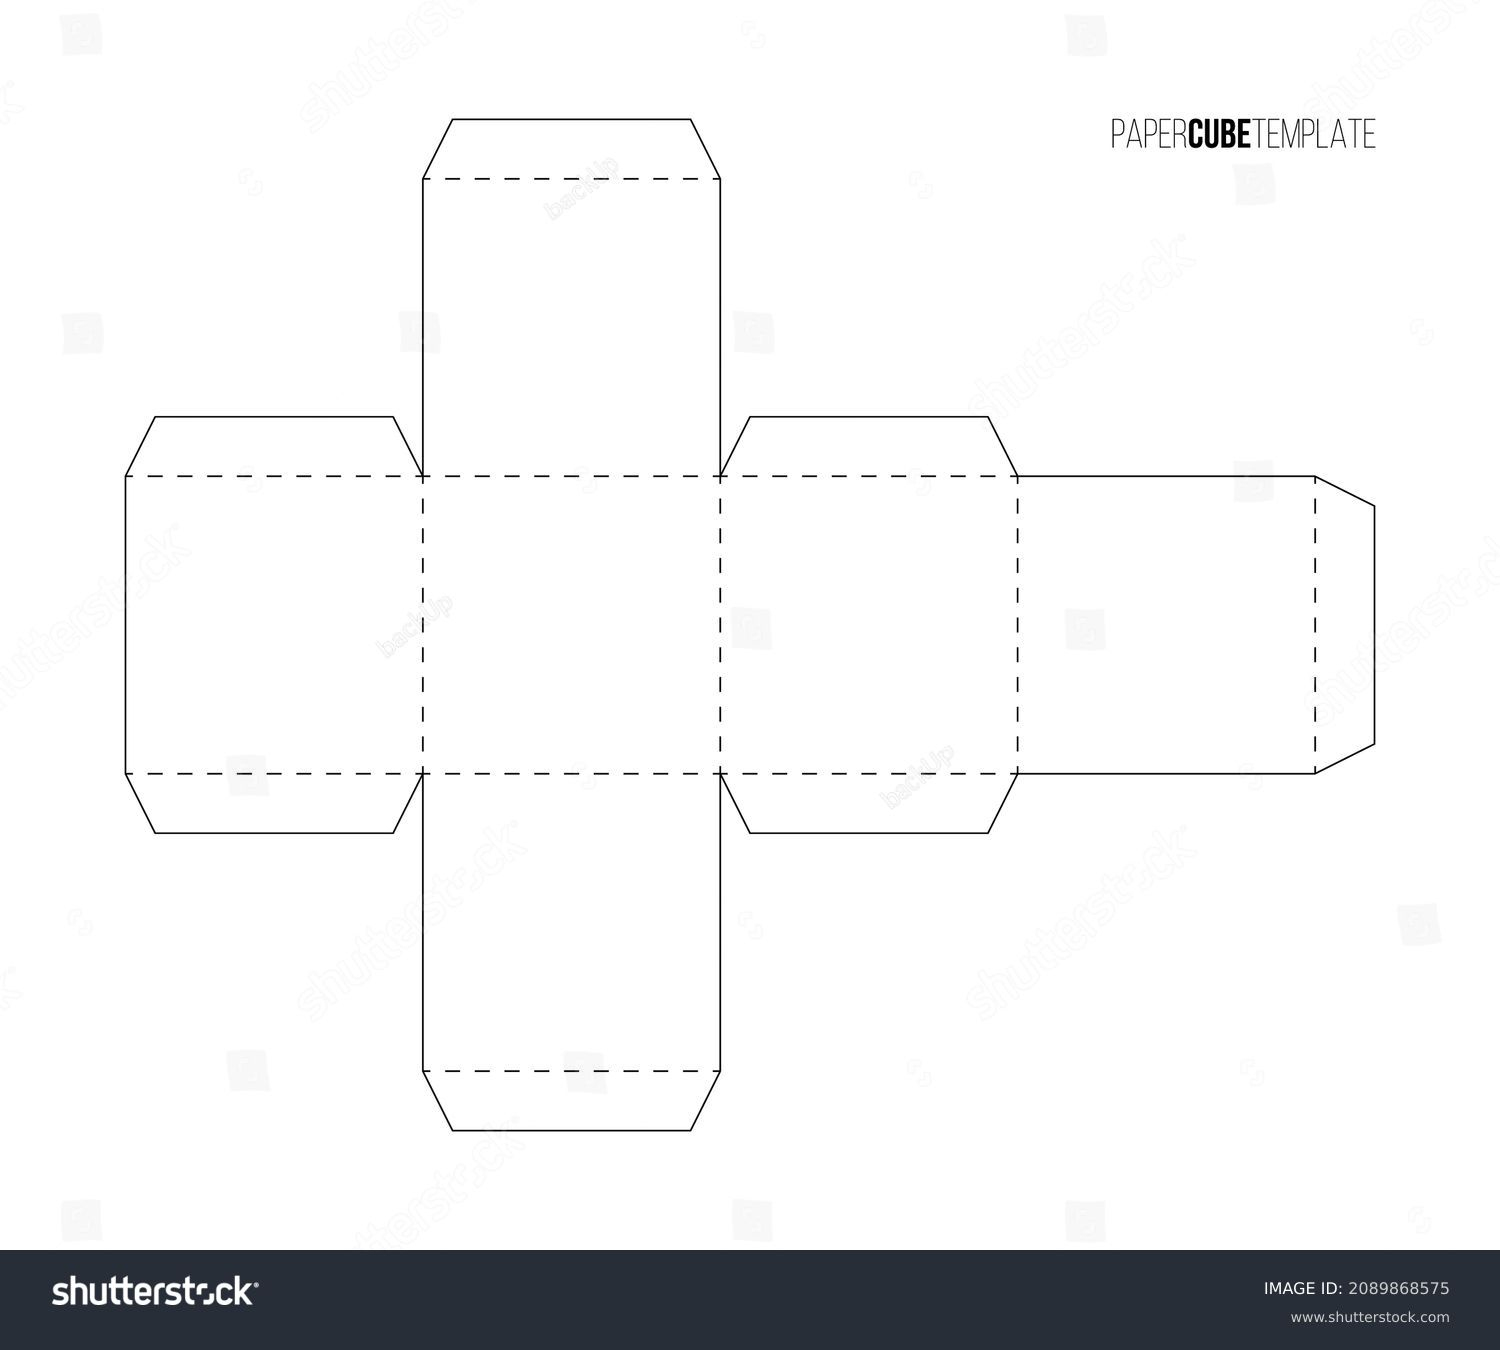 3,528 Papercraft Template Images, Stock Photos, 3D Objects - Free Printable Papercraft Templates